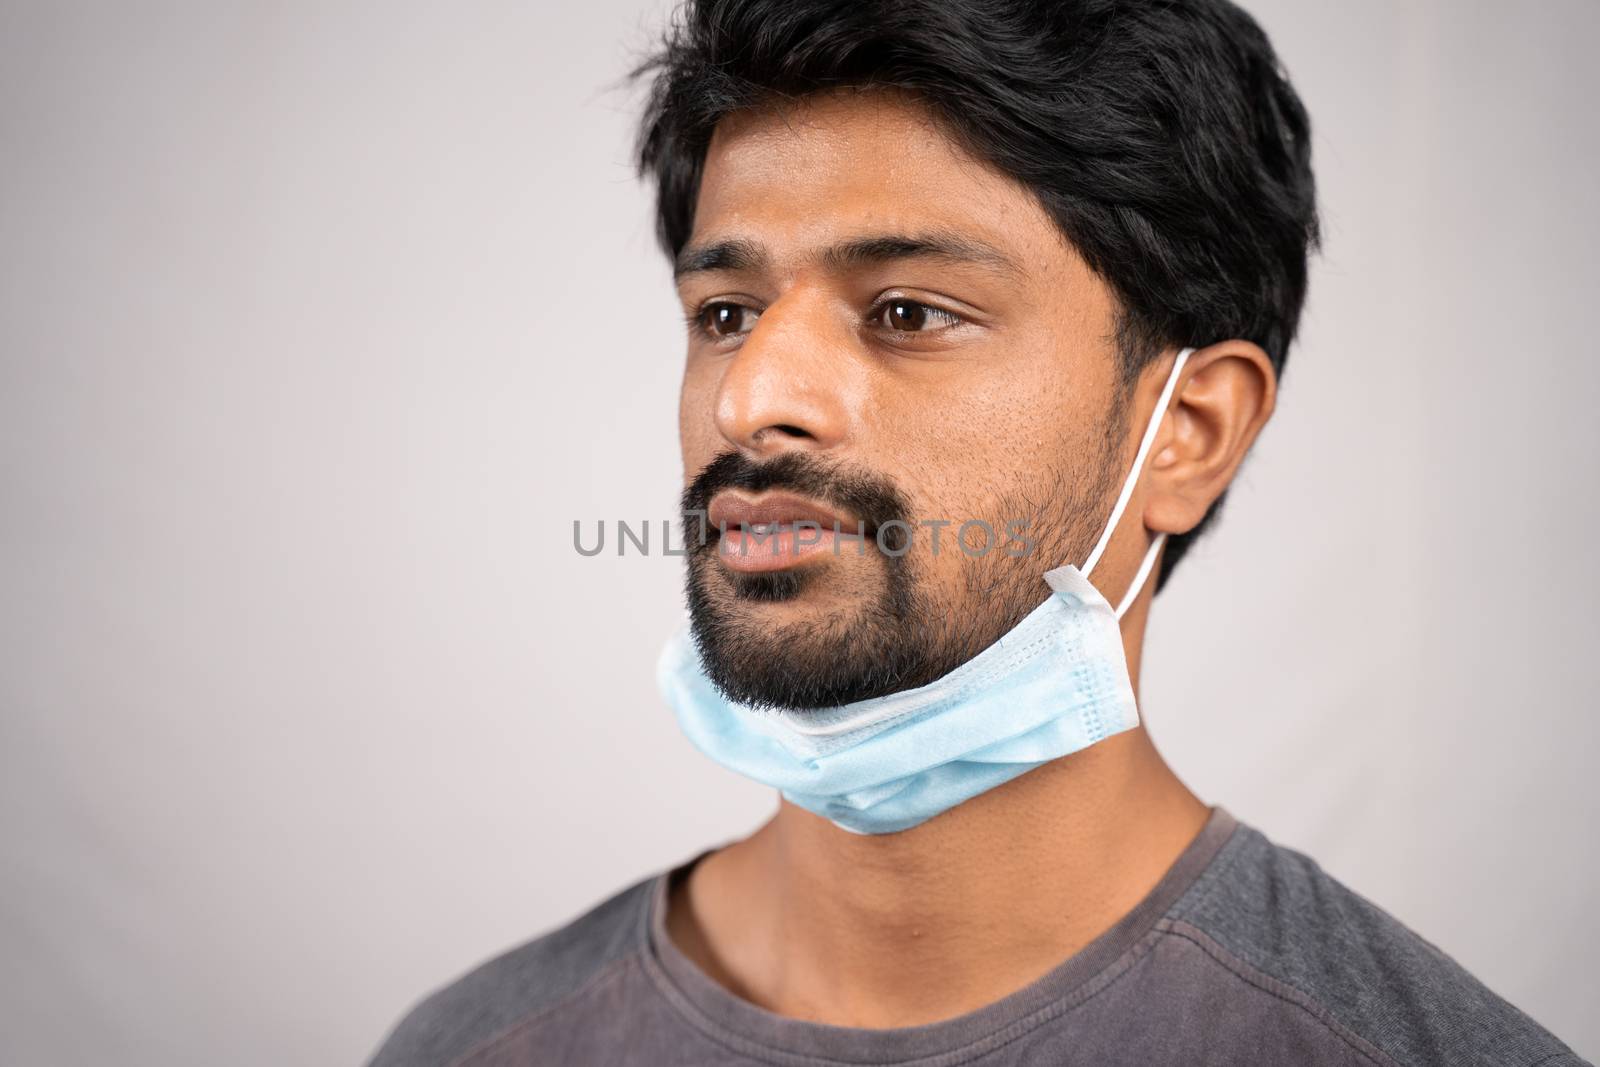 concept showing of improper way of using face masks during coronavirus or covid-19 crisis - young man wearing medical at neck on isolated background by lakshmiprasad.maski@gmai.com